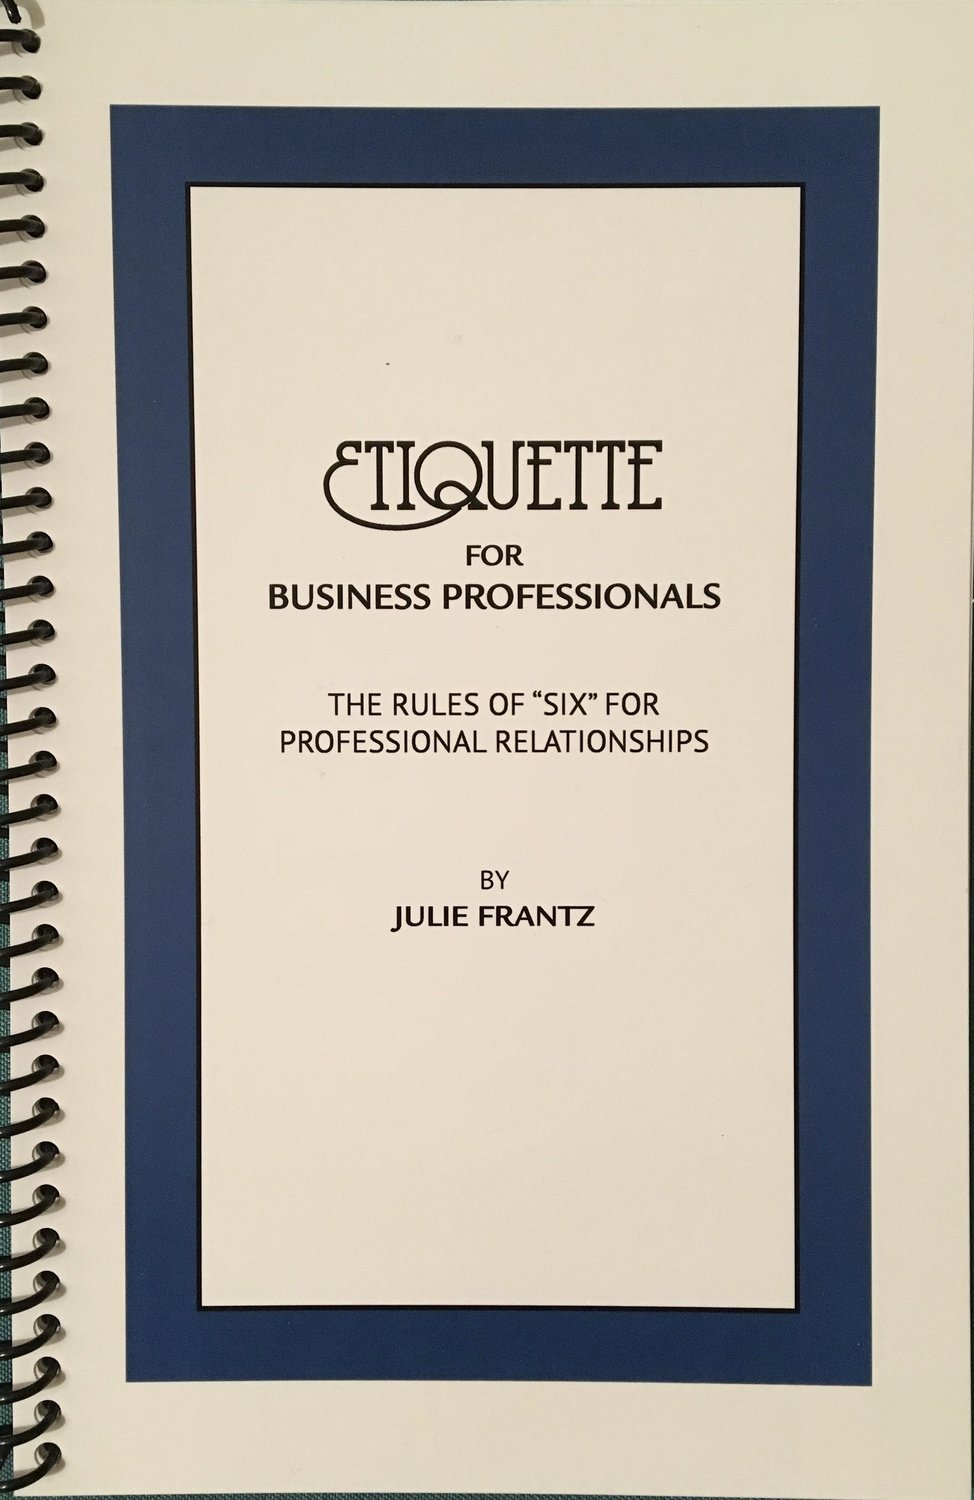 etiquette for the business professional cover photo